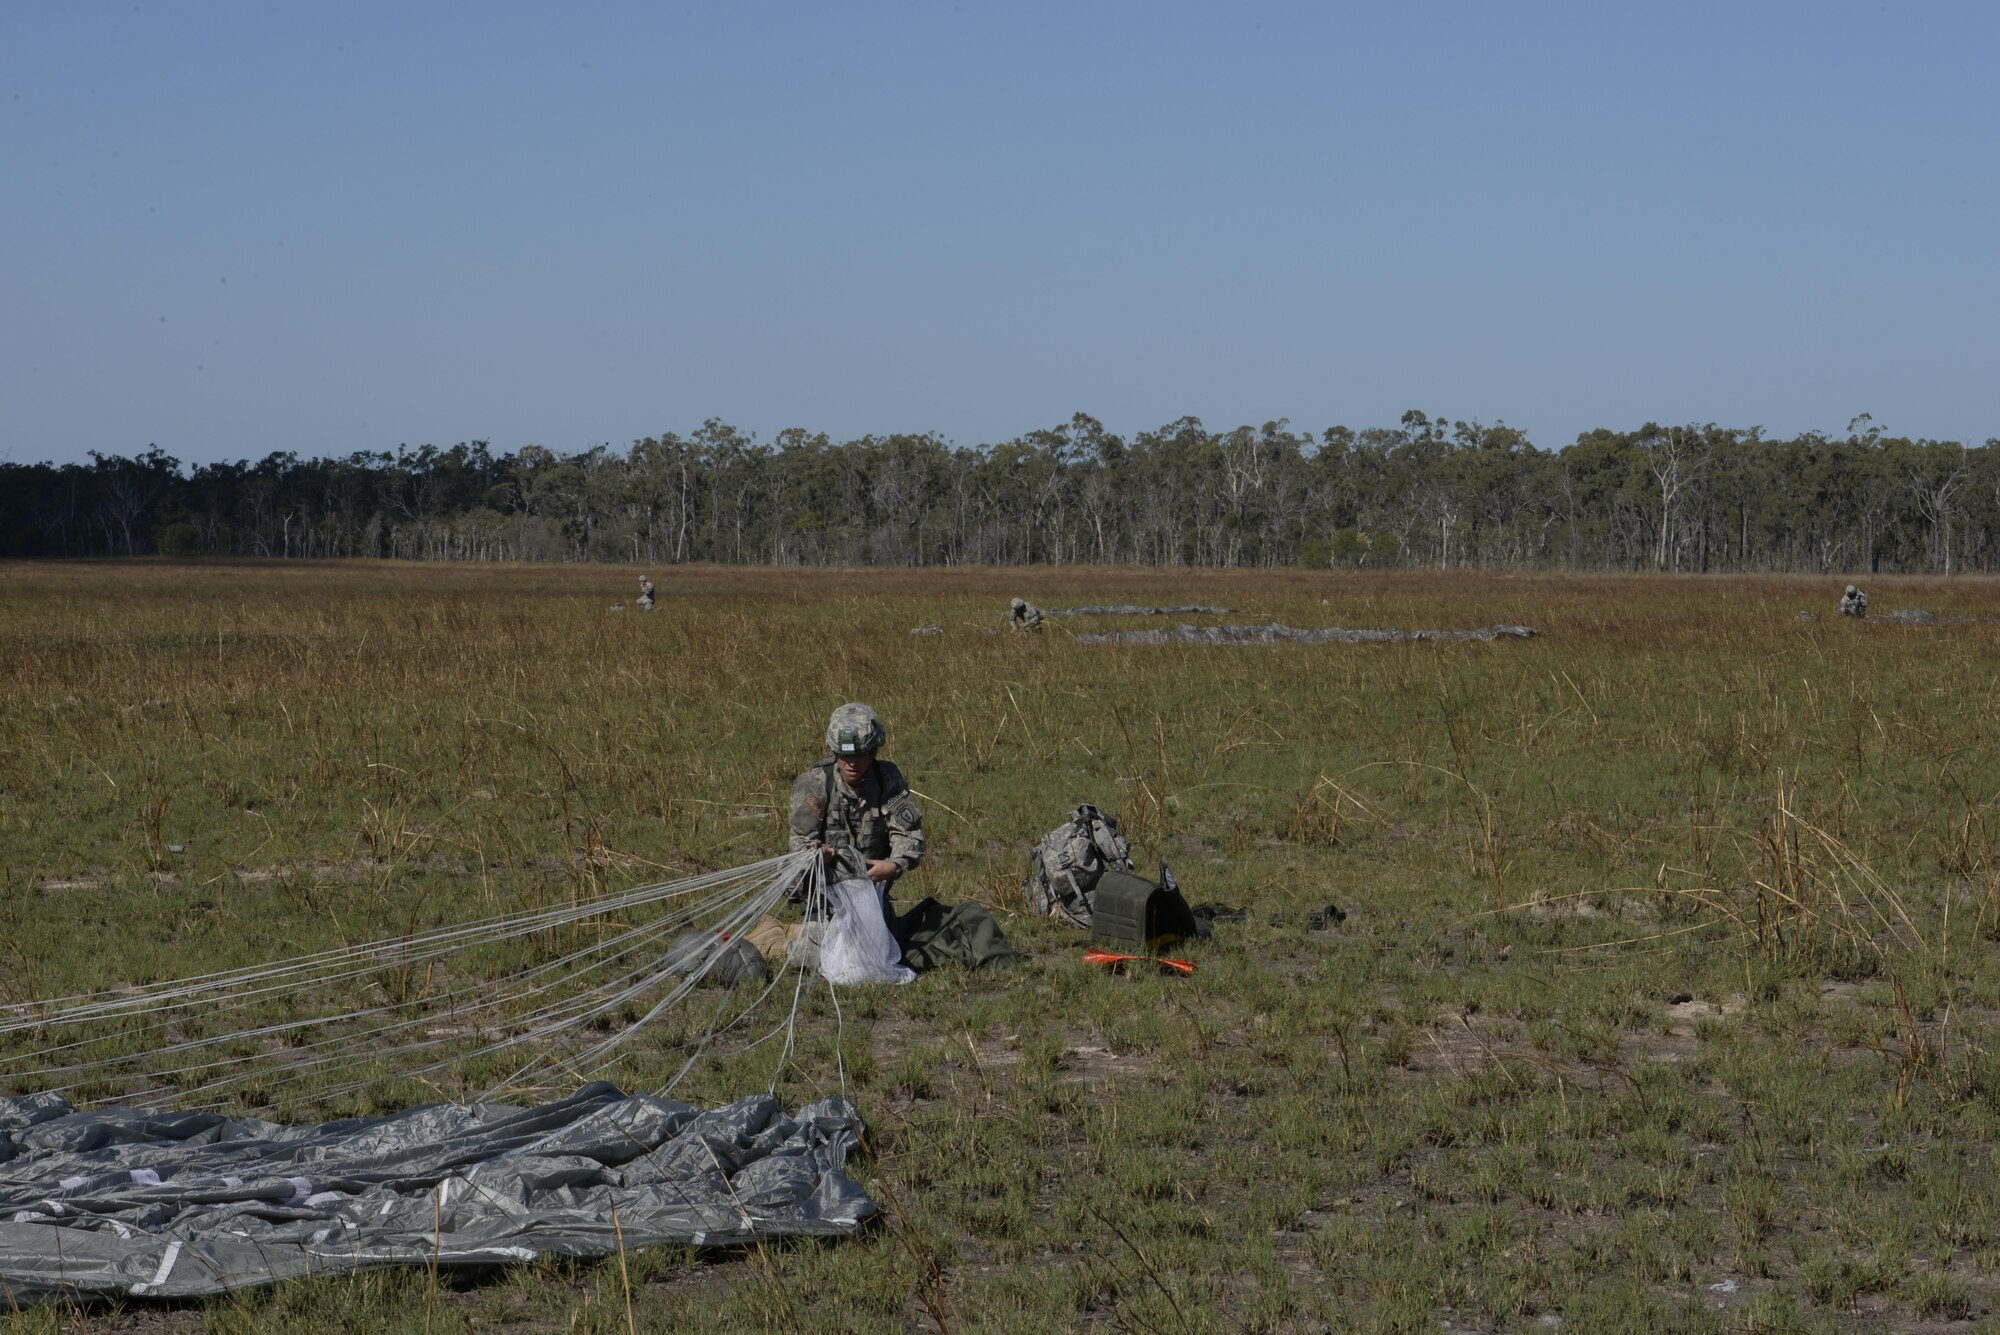 A jumper from the U.S. Army 4th Battalion, 25th Infantry Airborne packs his parachute after jumping from a C-17 Globemaster III aircraft during exercise Talisman Sabre in Northern Territory, Australia, July 8, 2015. Exercises such as Talisman Sabre 2015 provide realistic, relevant training which is necessary to maintain regional security, peace and stability. (U.S. Air Force photo by Senior Airman Stephen G. Eigel)